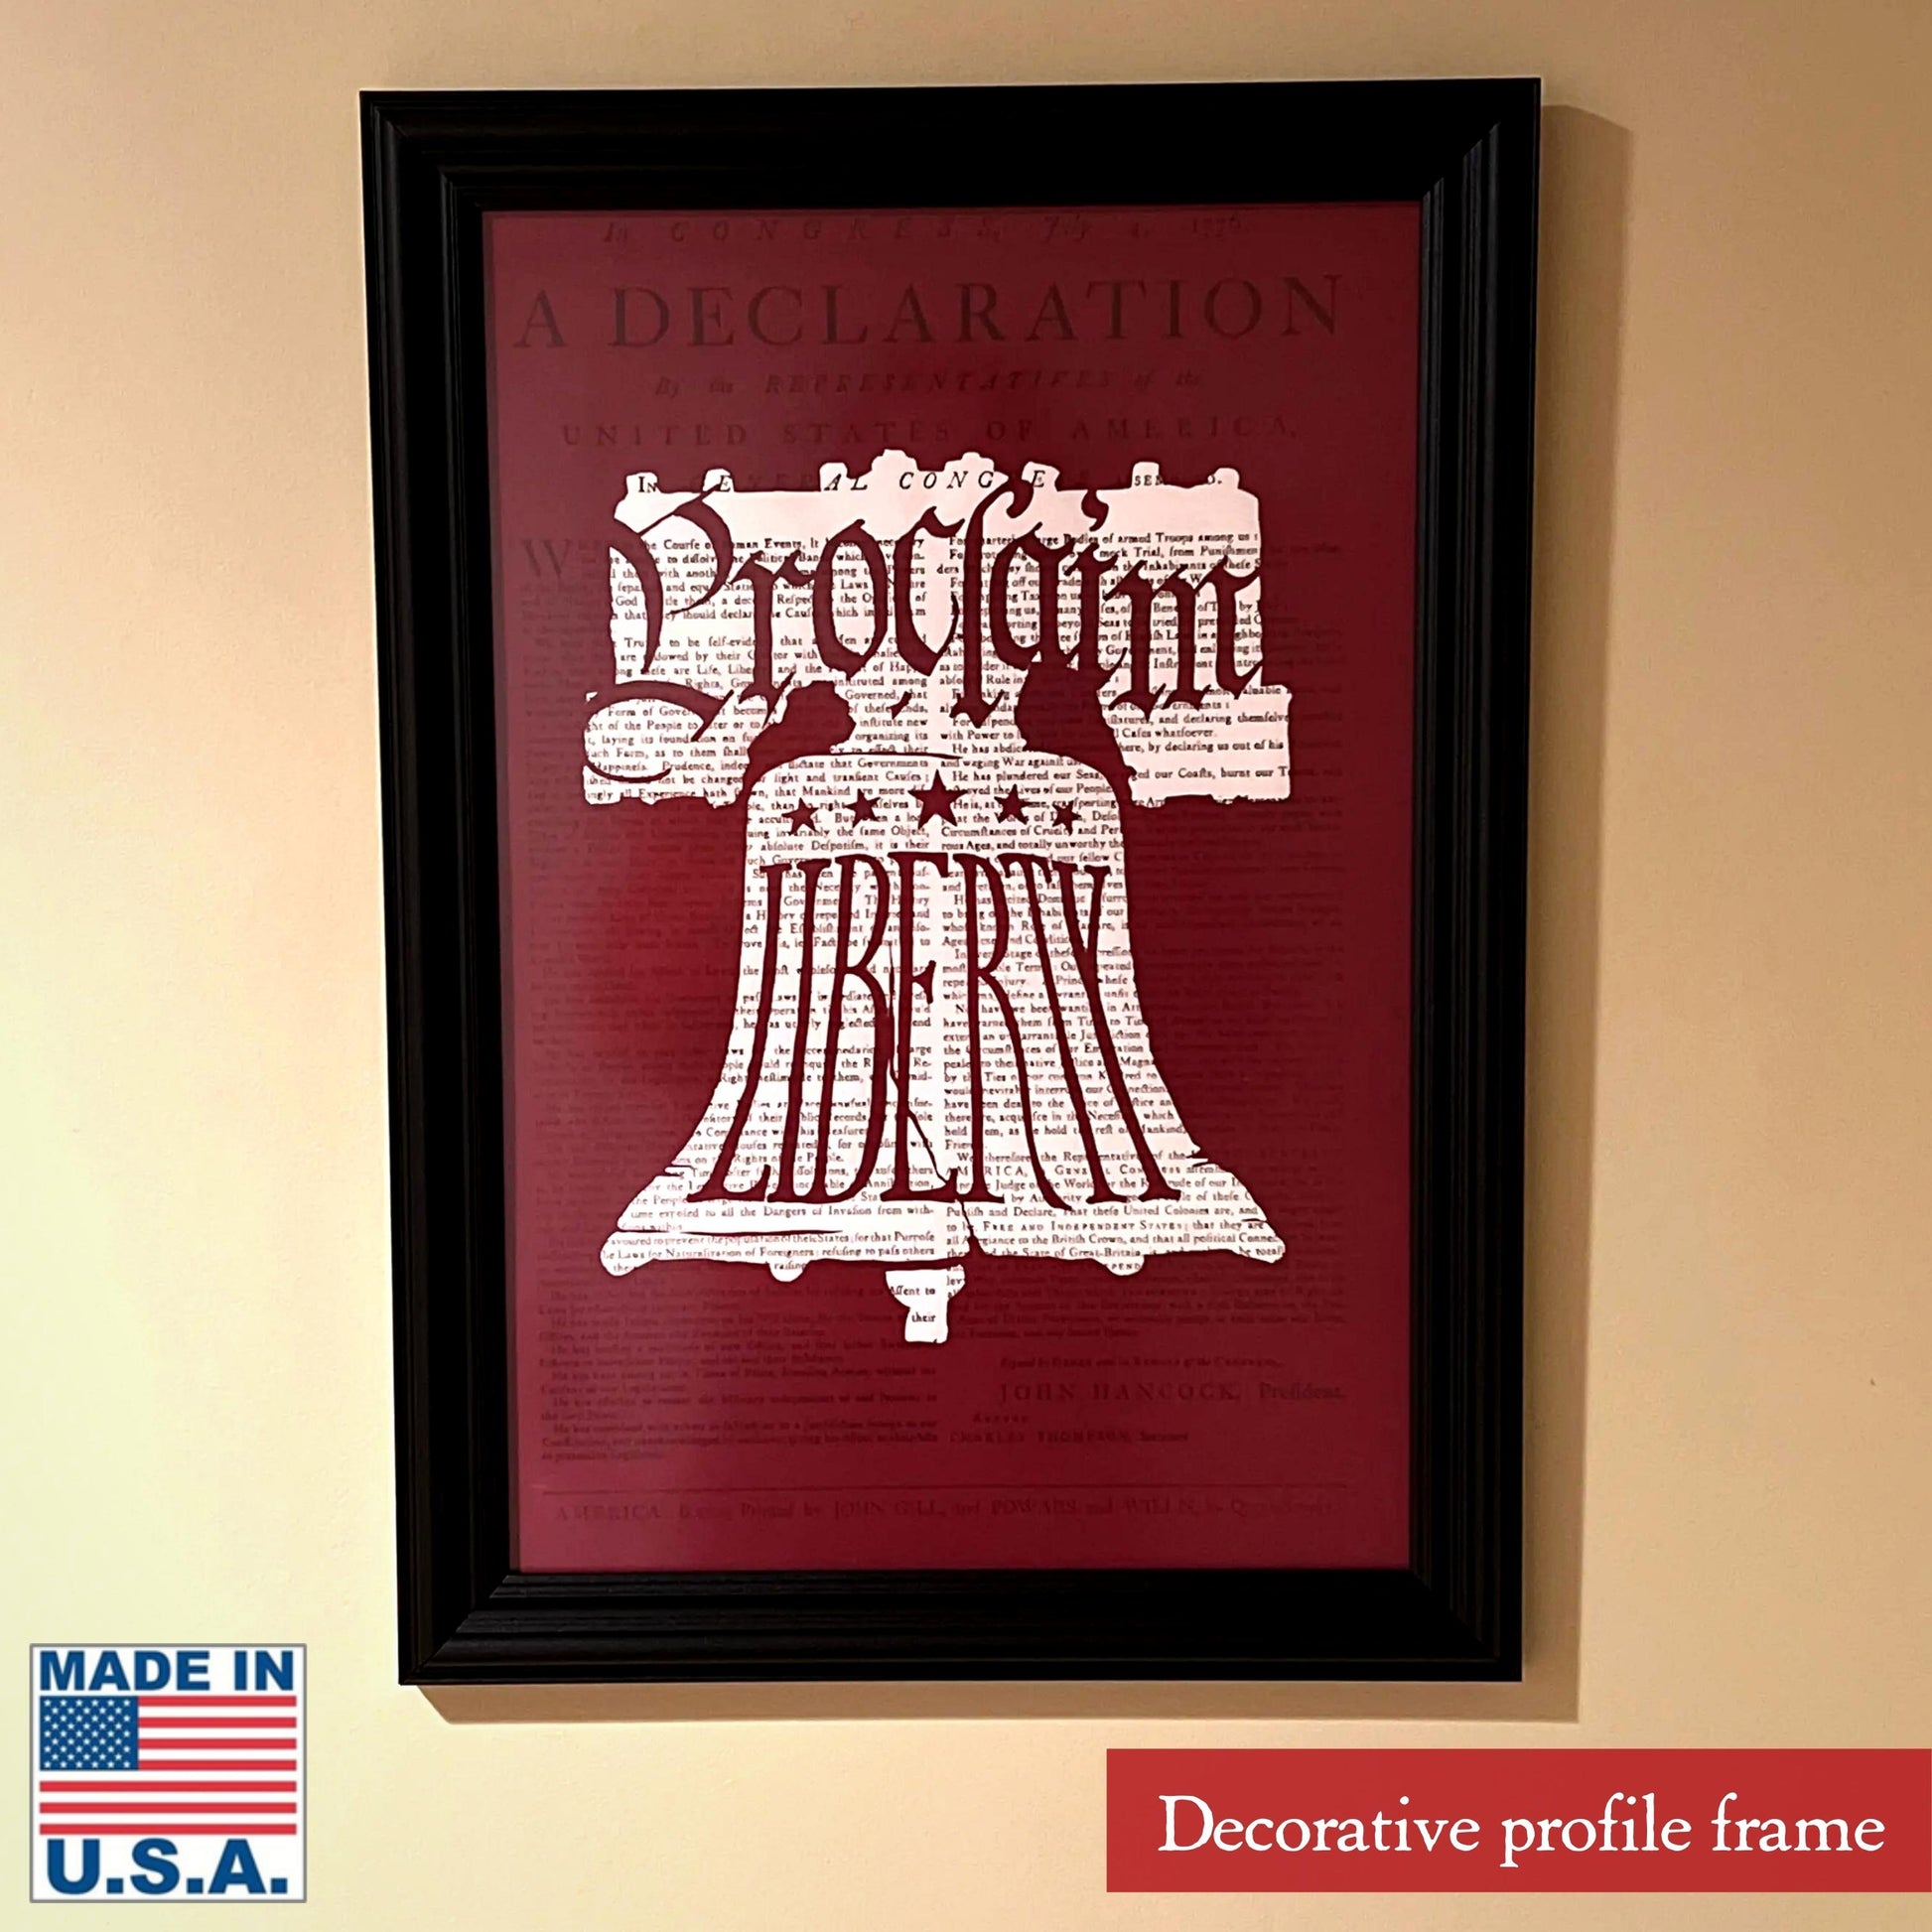 Decorative profile frame of "Proclaim Liberty” on a Boston broadside of the Declaration of Independence from The History List store